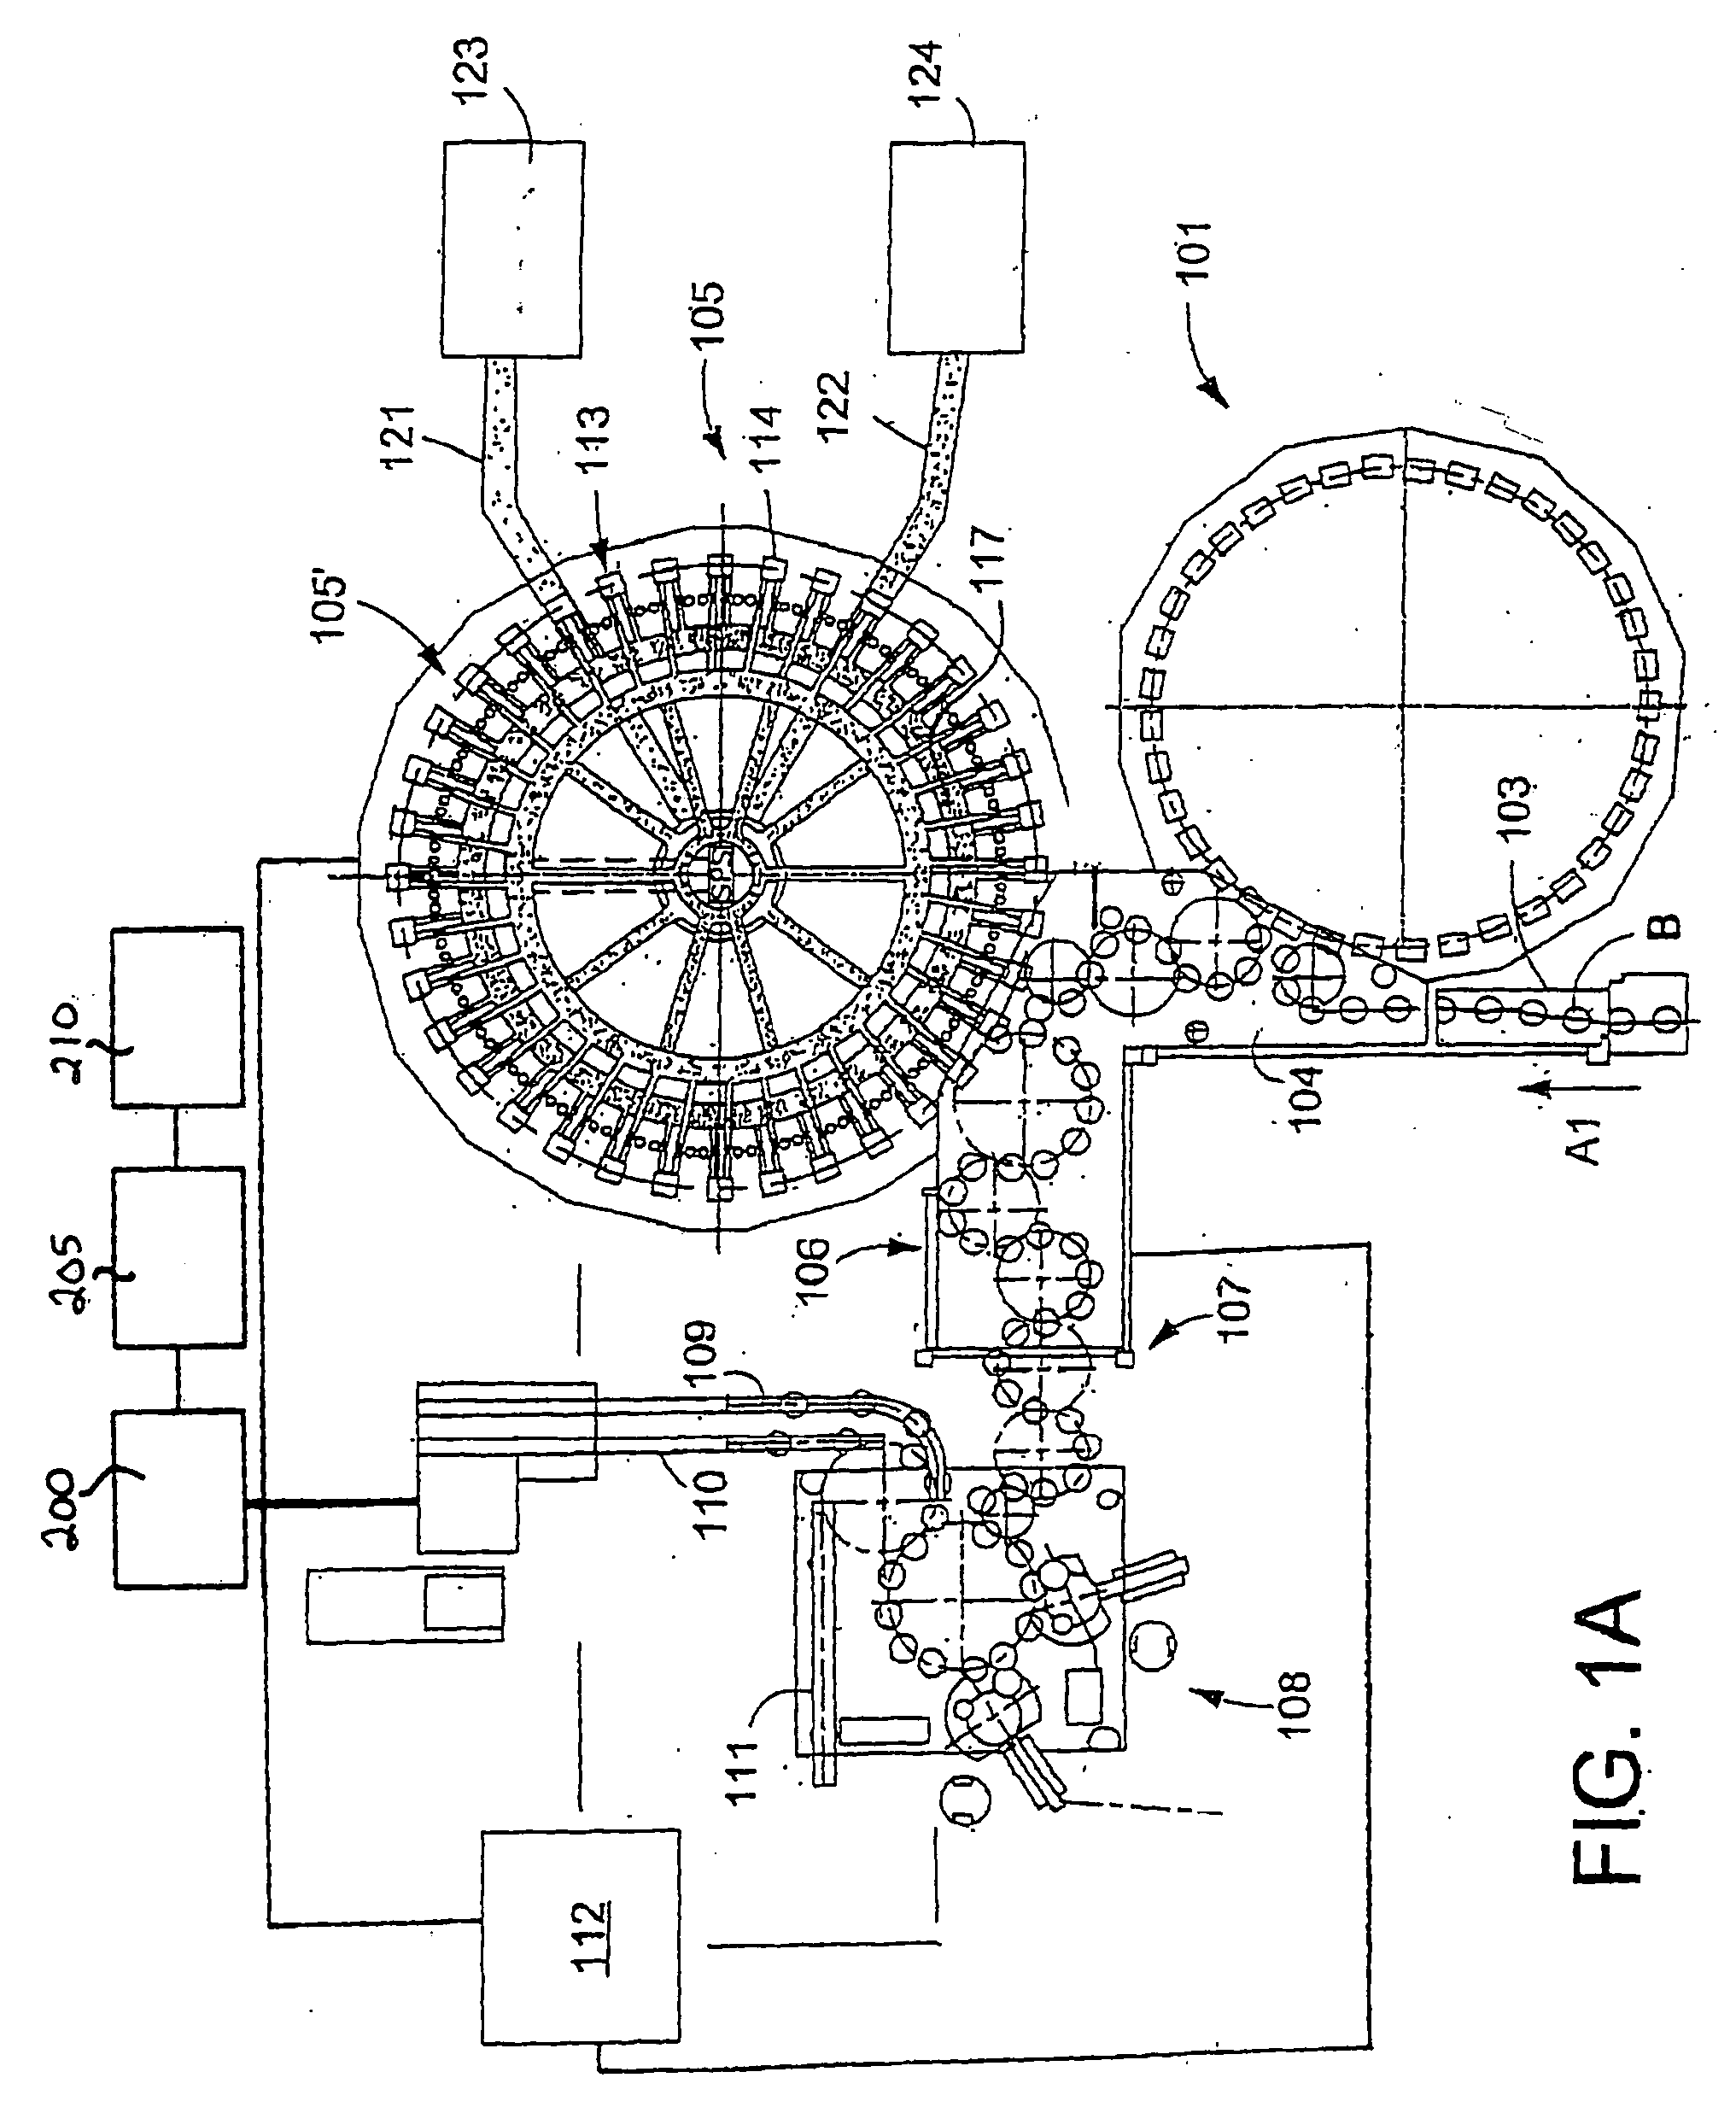 Beverage bottling plant for filling bottles with a liquid beverage material having a machine and method for wrapping filled bottles